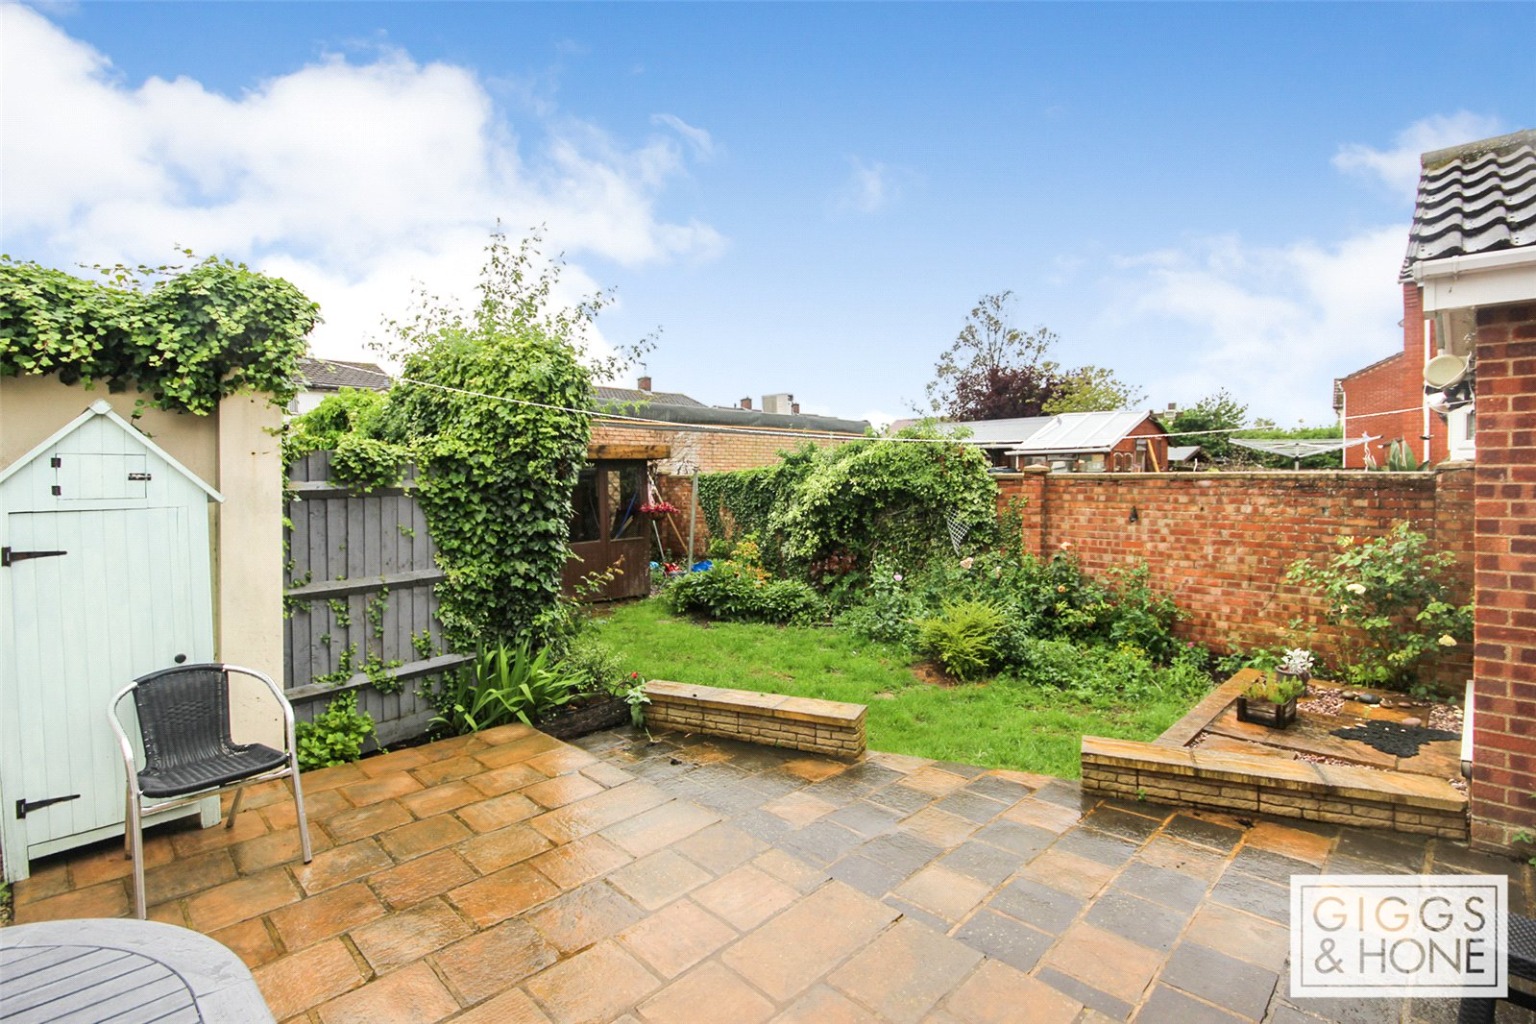 3 bed semi-detached house for sale in Crane Way, Bedford 3